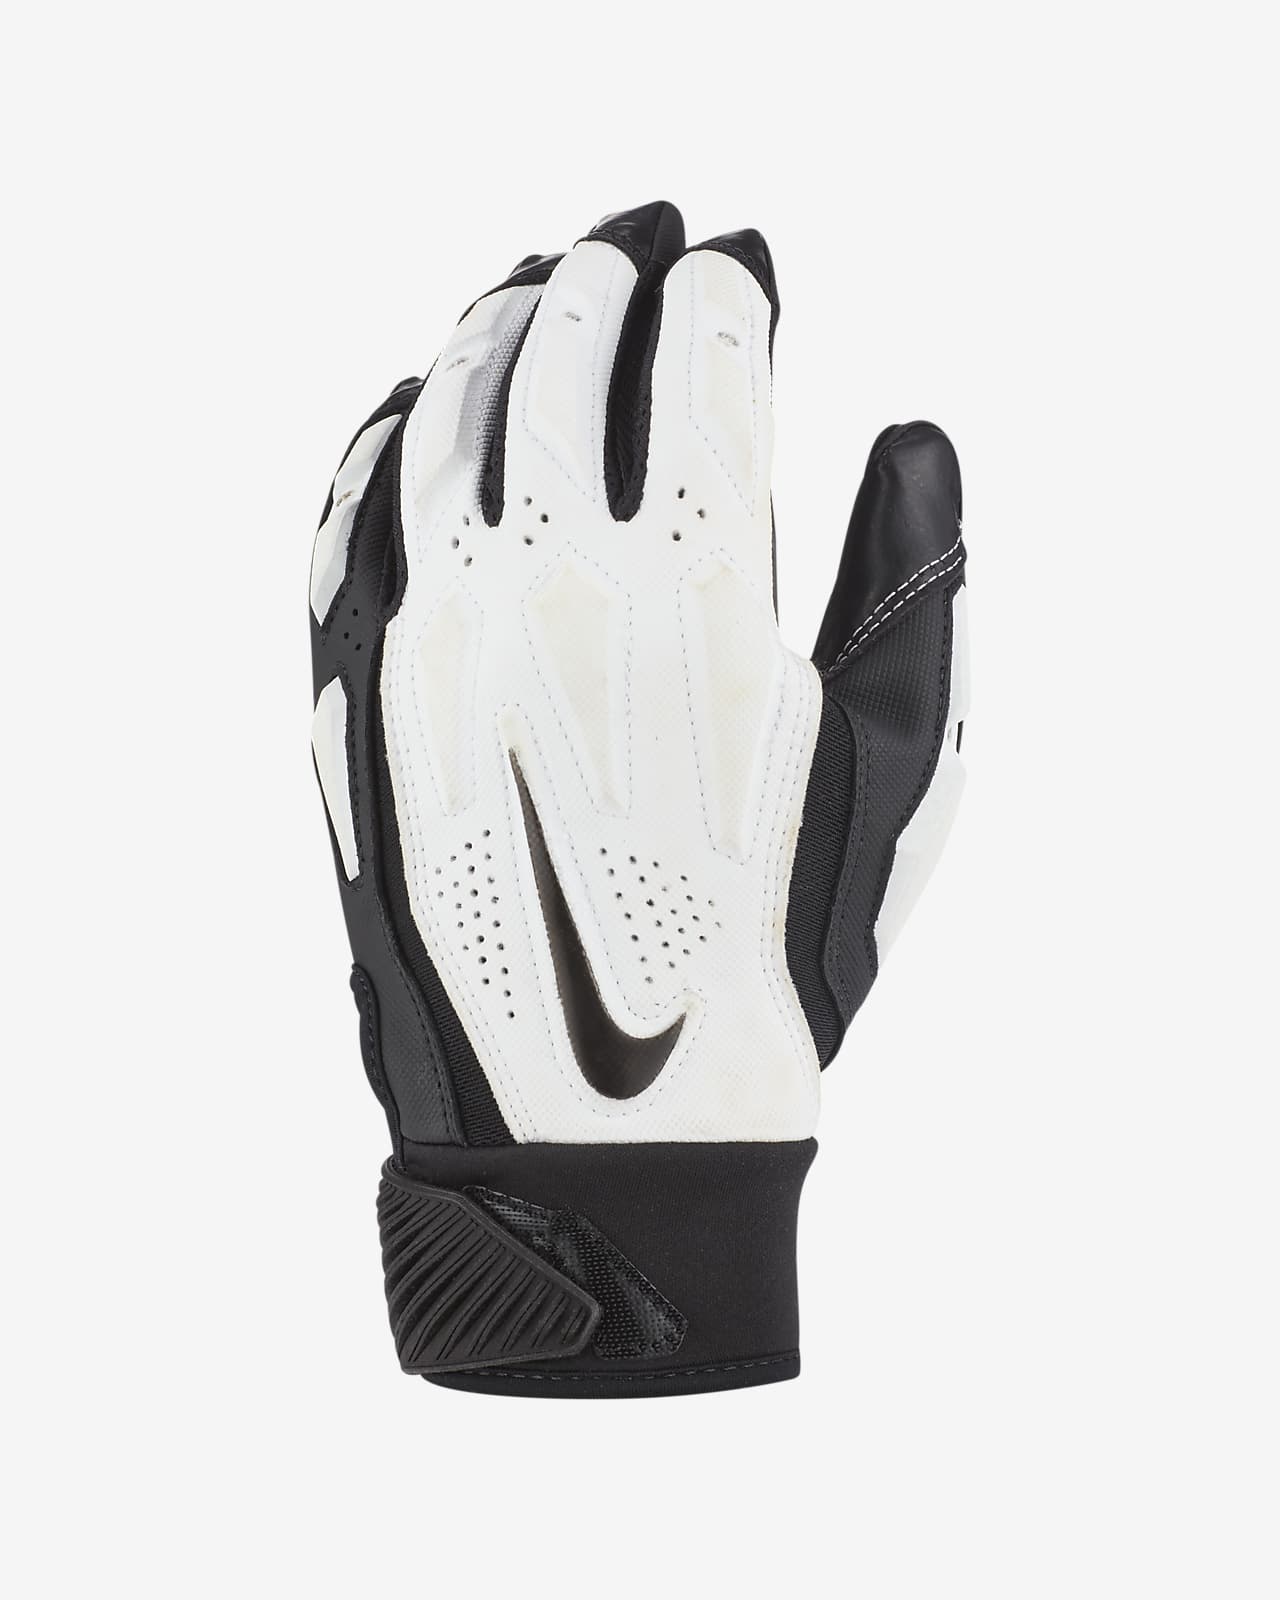 Nike D-Tack 6.0 Youth Size Small Lineman Gel Padded Football Gloves #NFG22 White